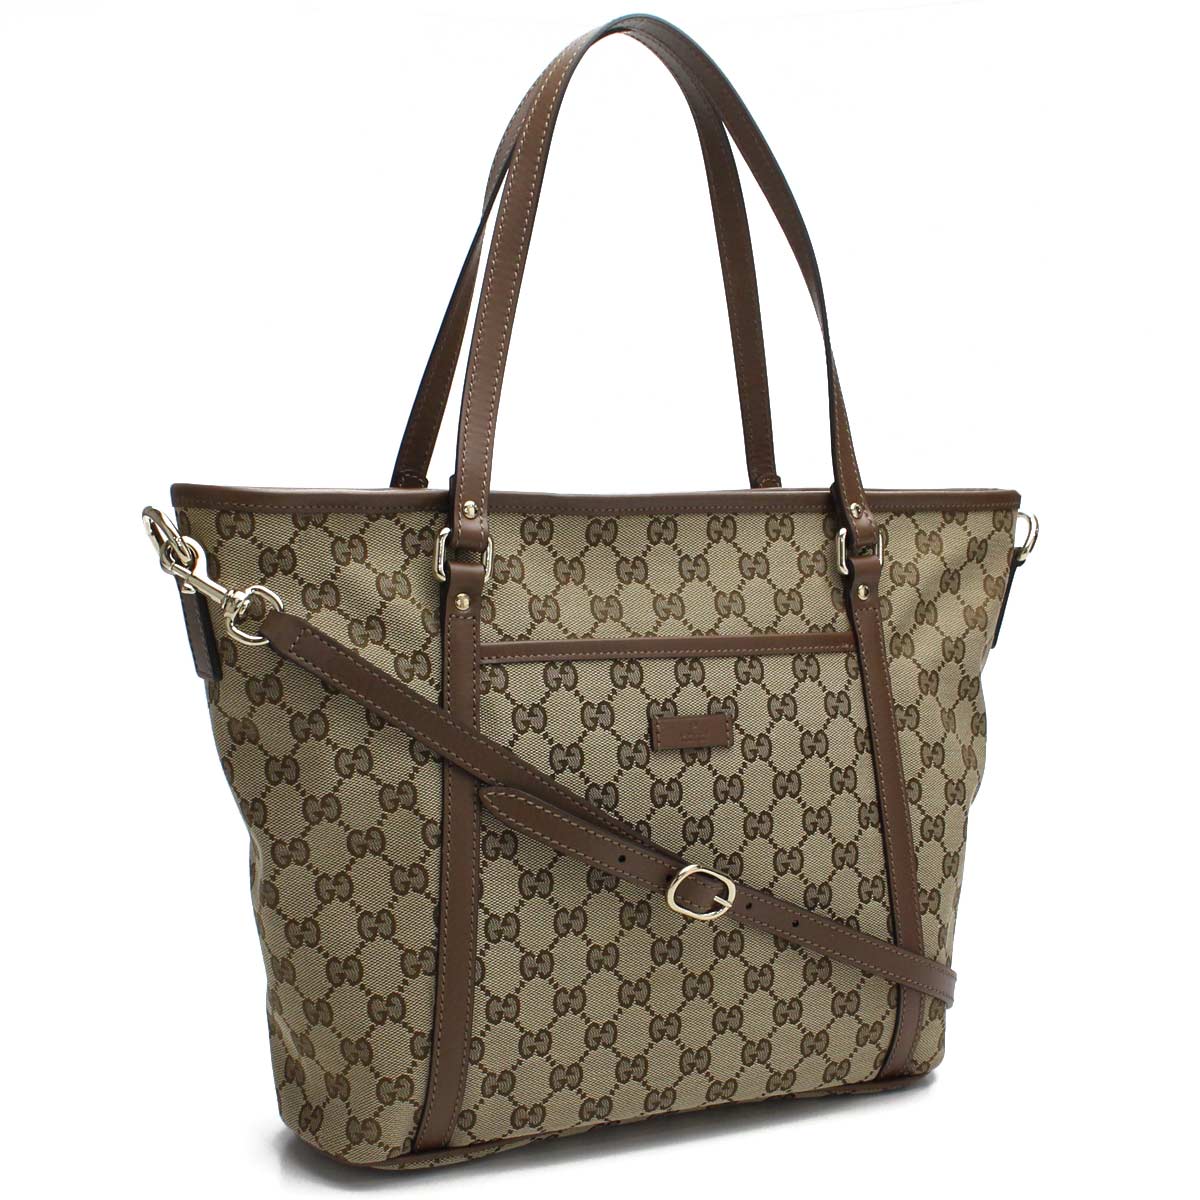 Bighit The total brand wholesale: Gucci GUCCI GG canvas 2way tote bag 388929 KQWFZ 8871 brown ...